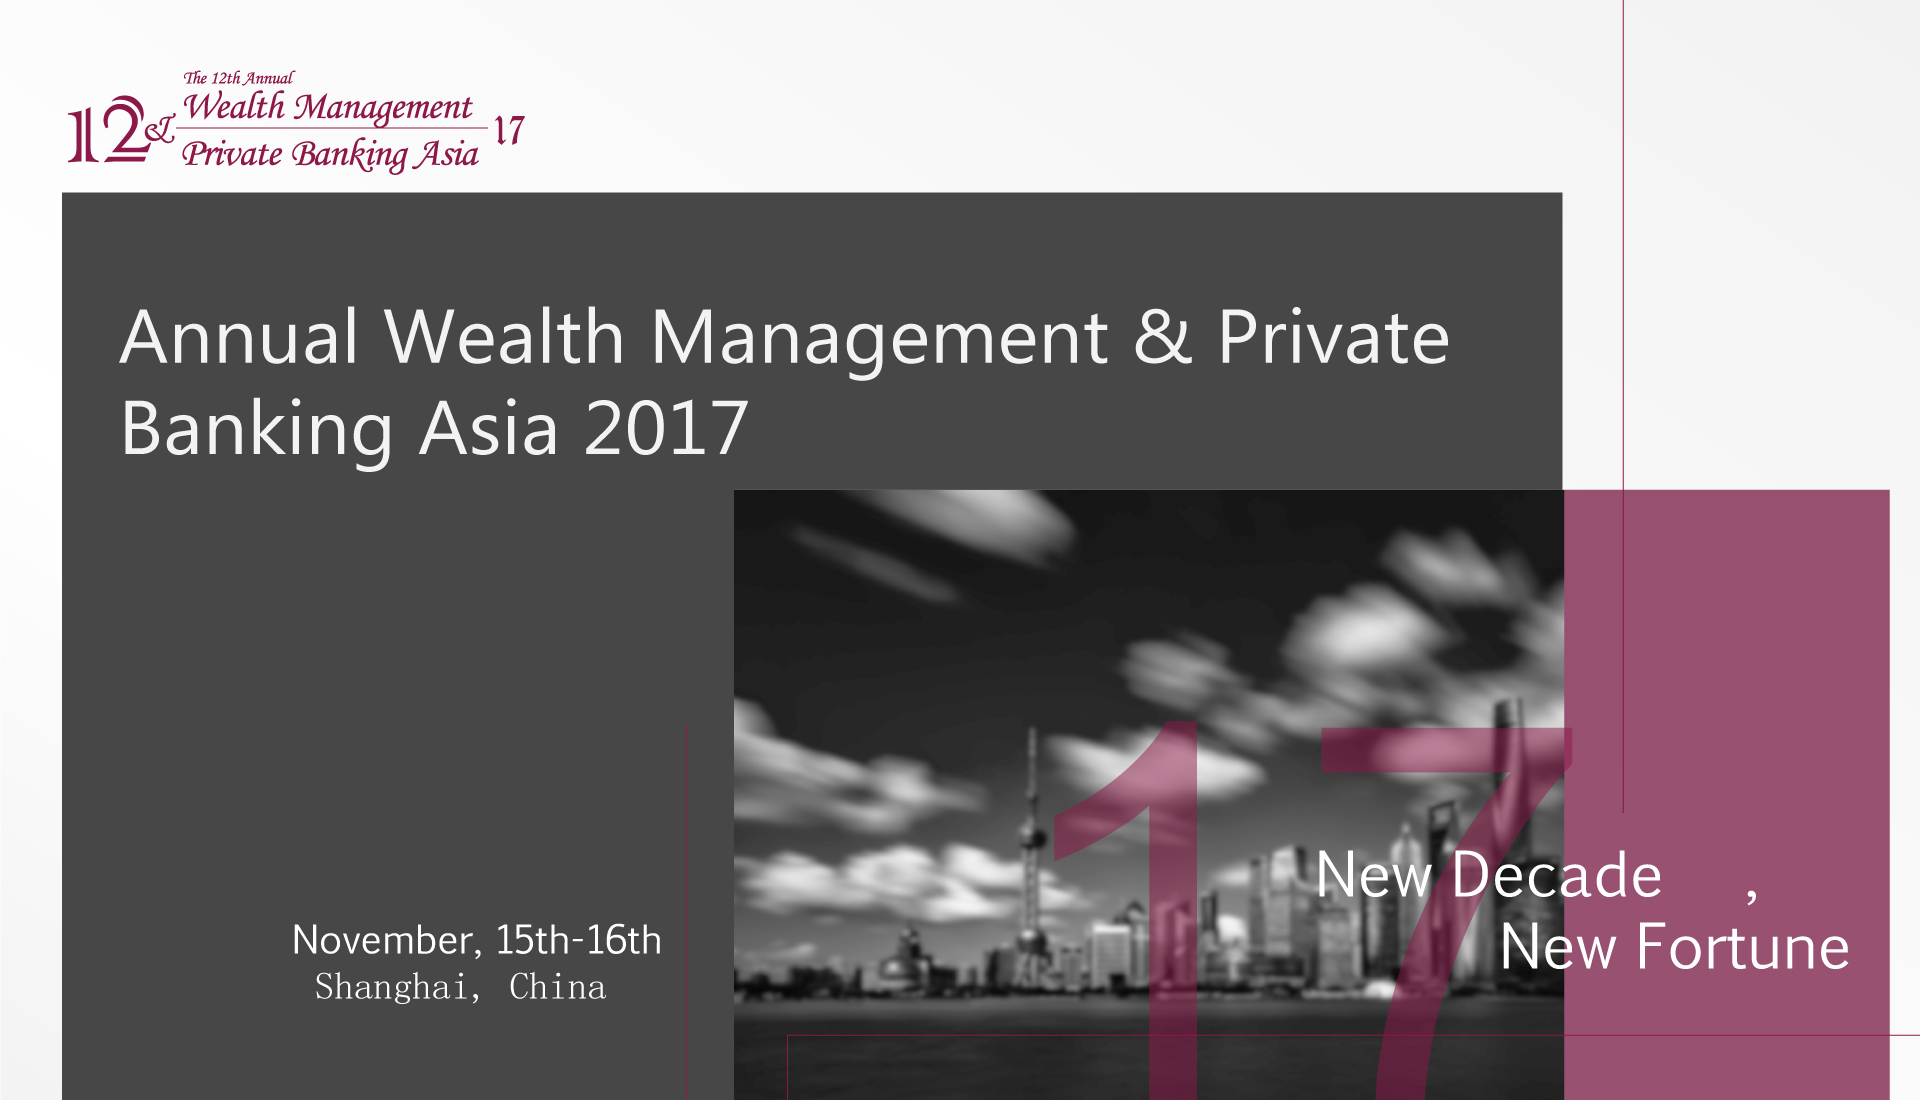 The 12th Annual wealth management and private banking asia 2017